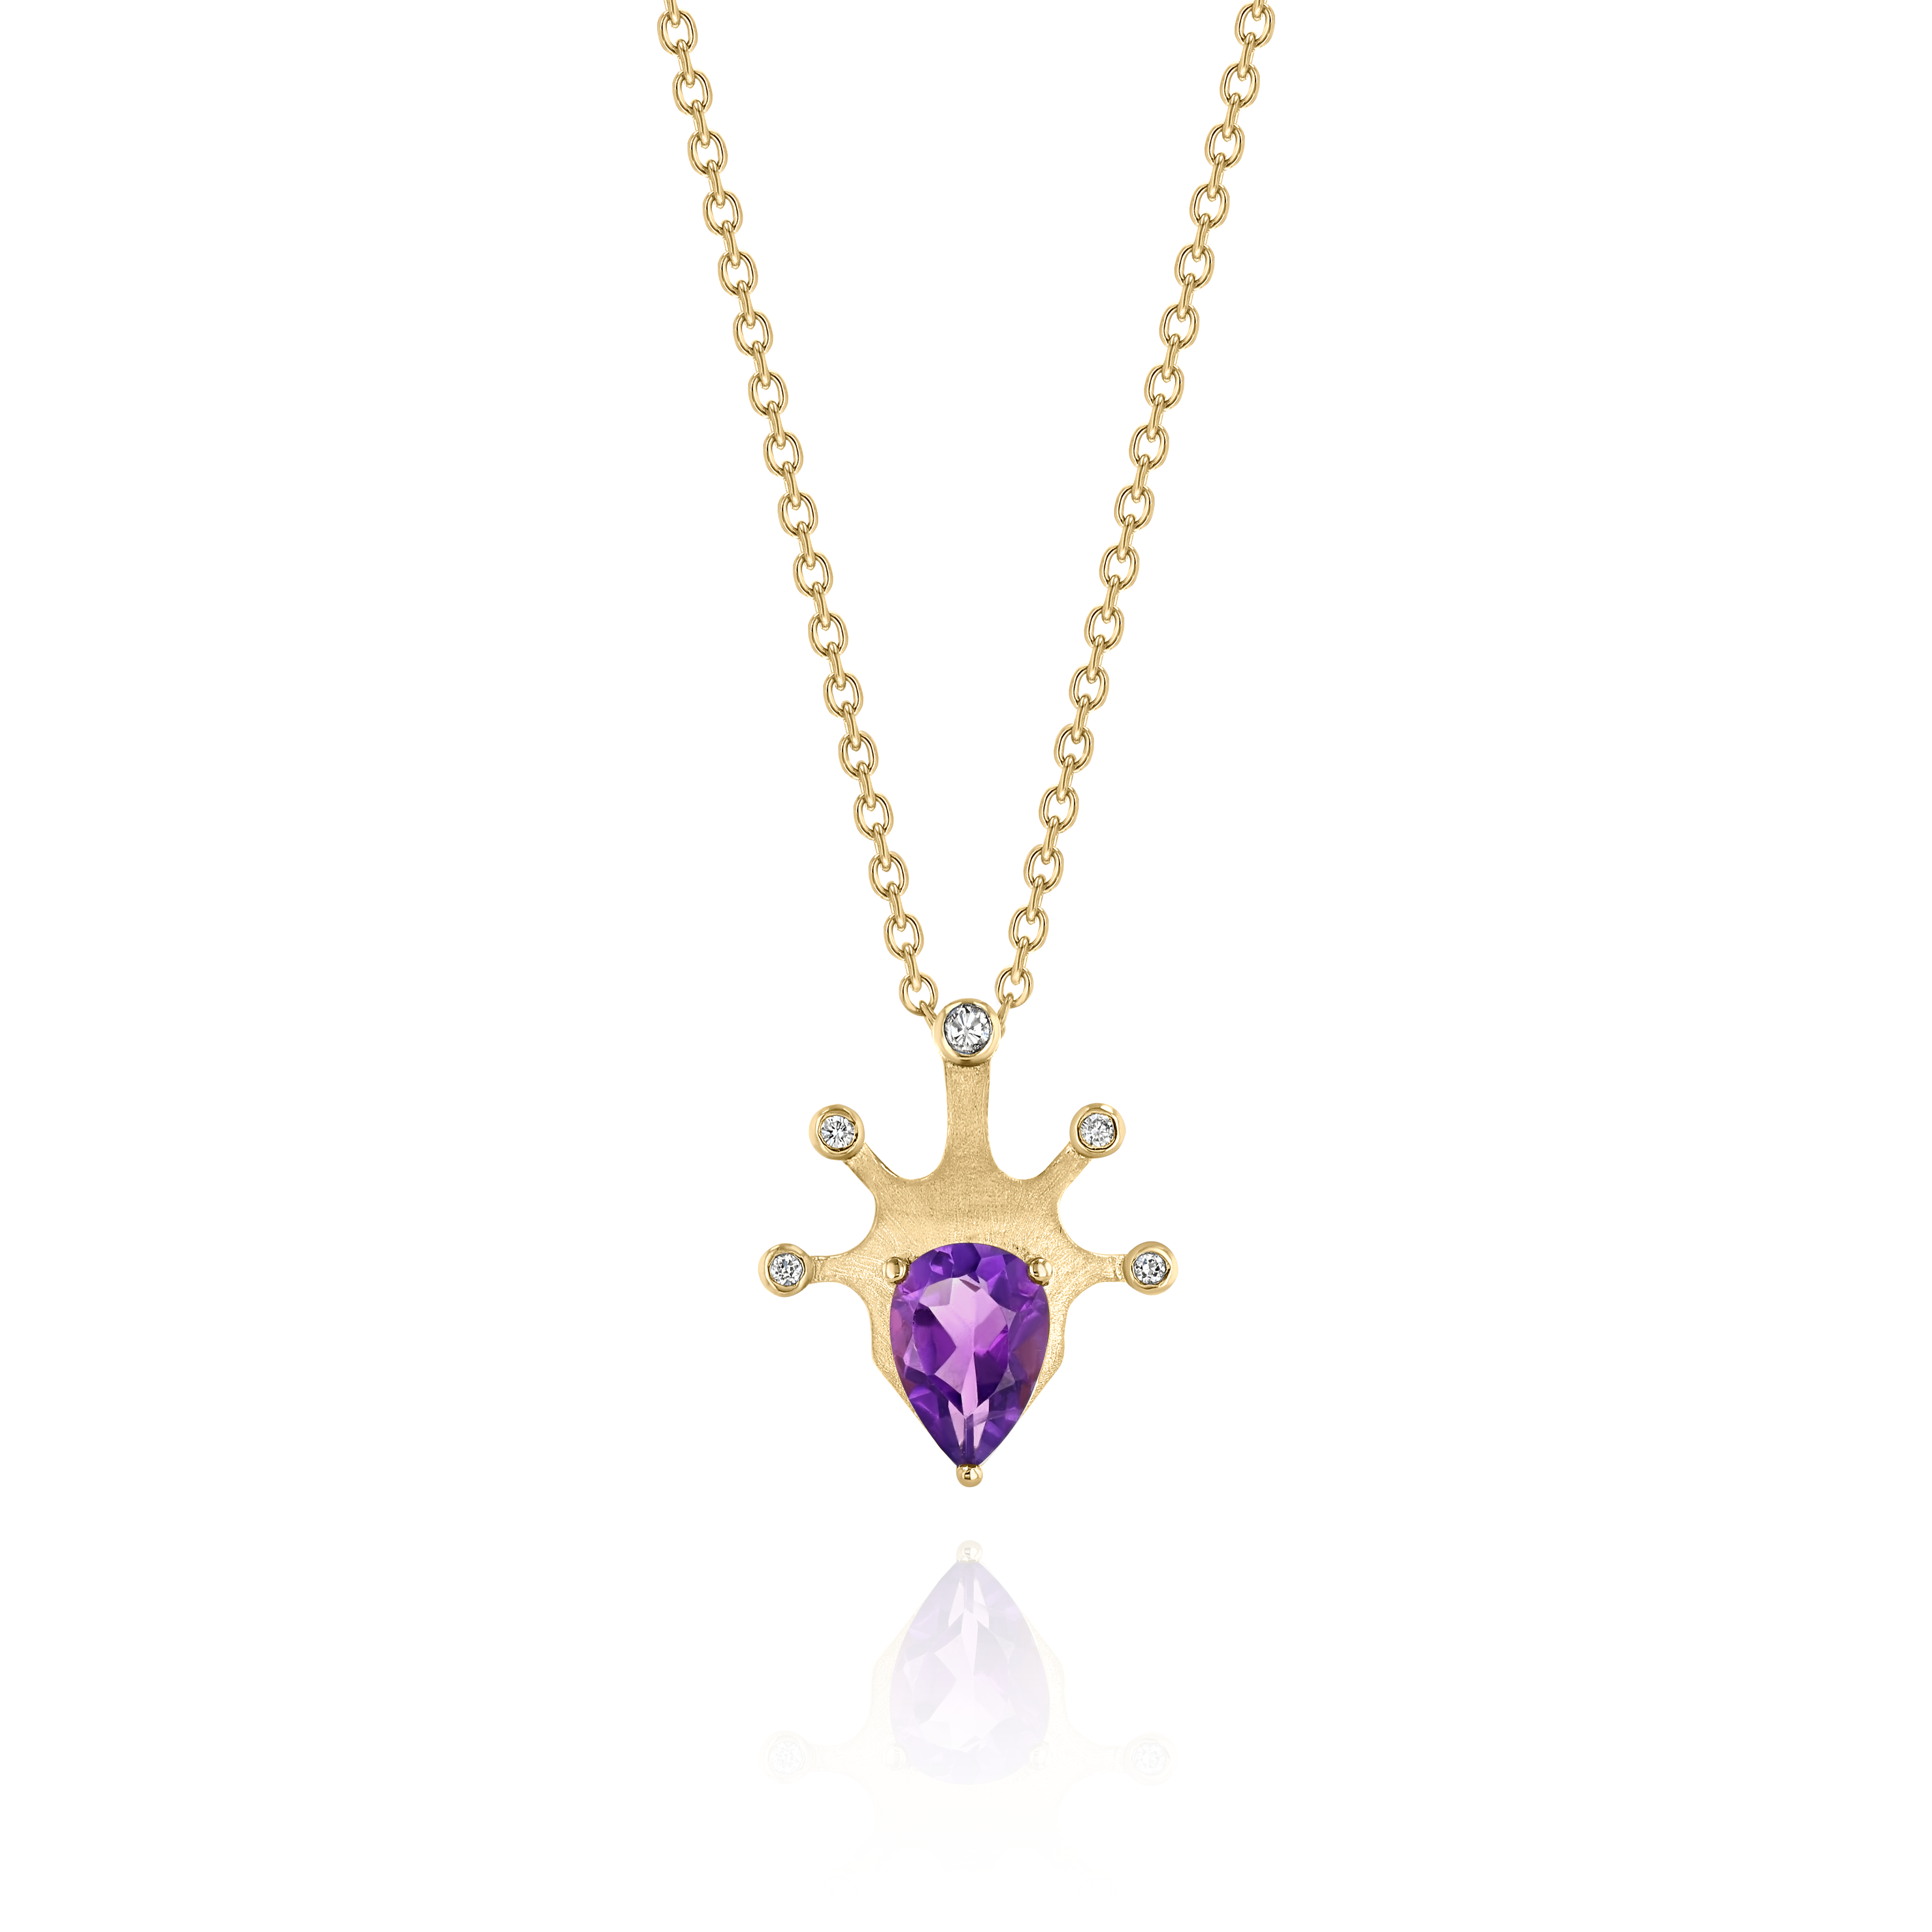 Yellow Gold Necklace with a pear shaped Amethyst and small round Diamonds, Small